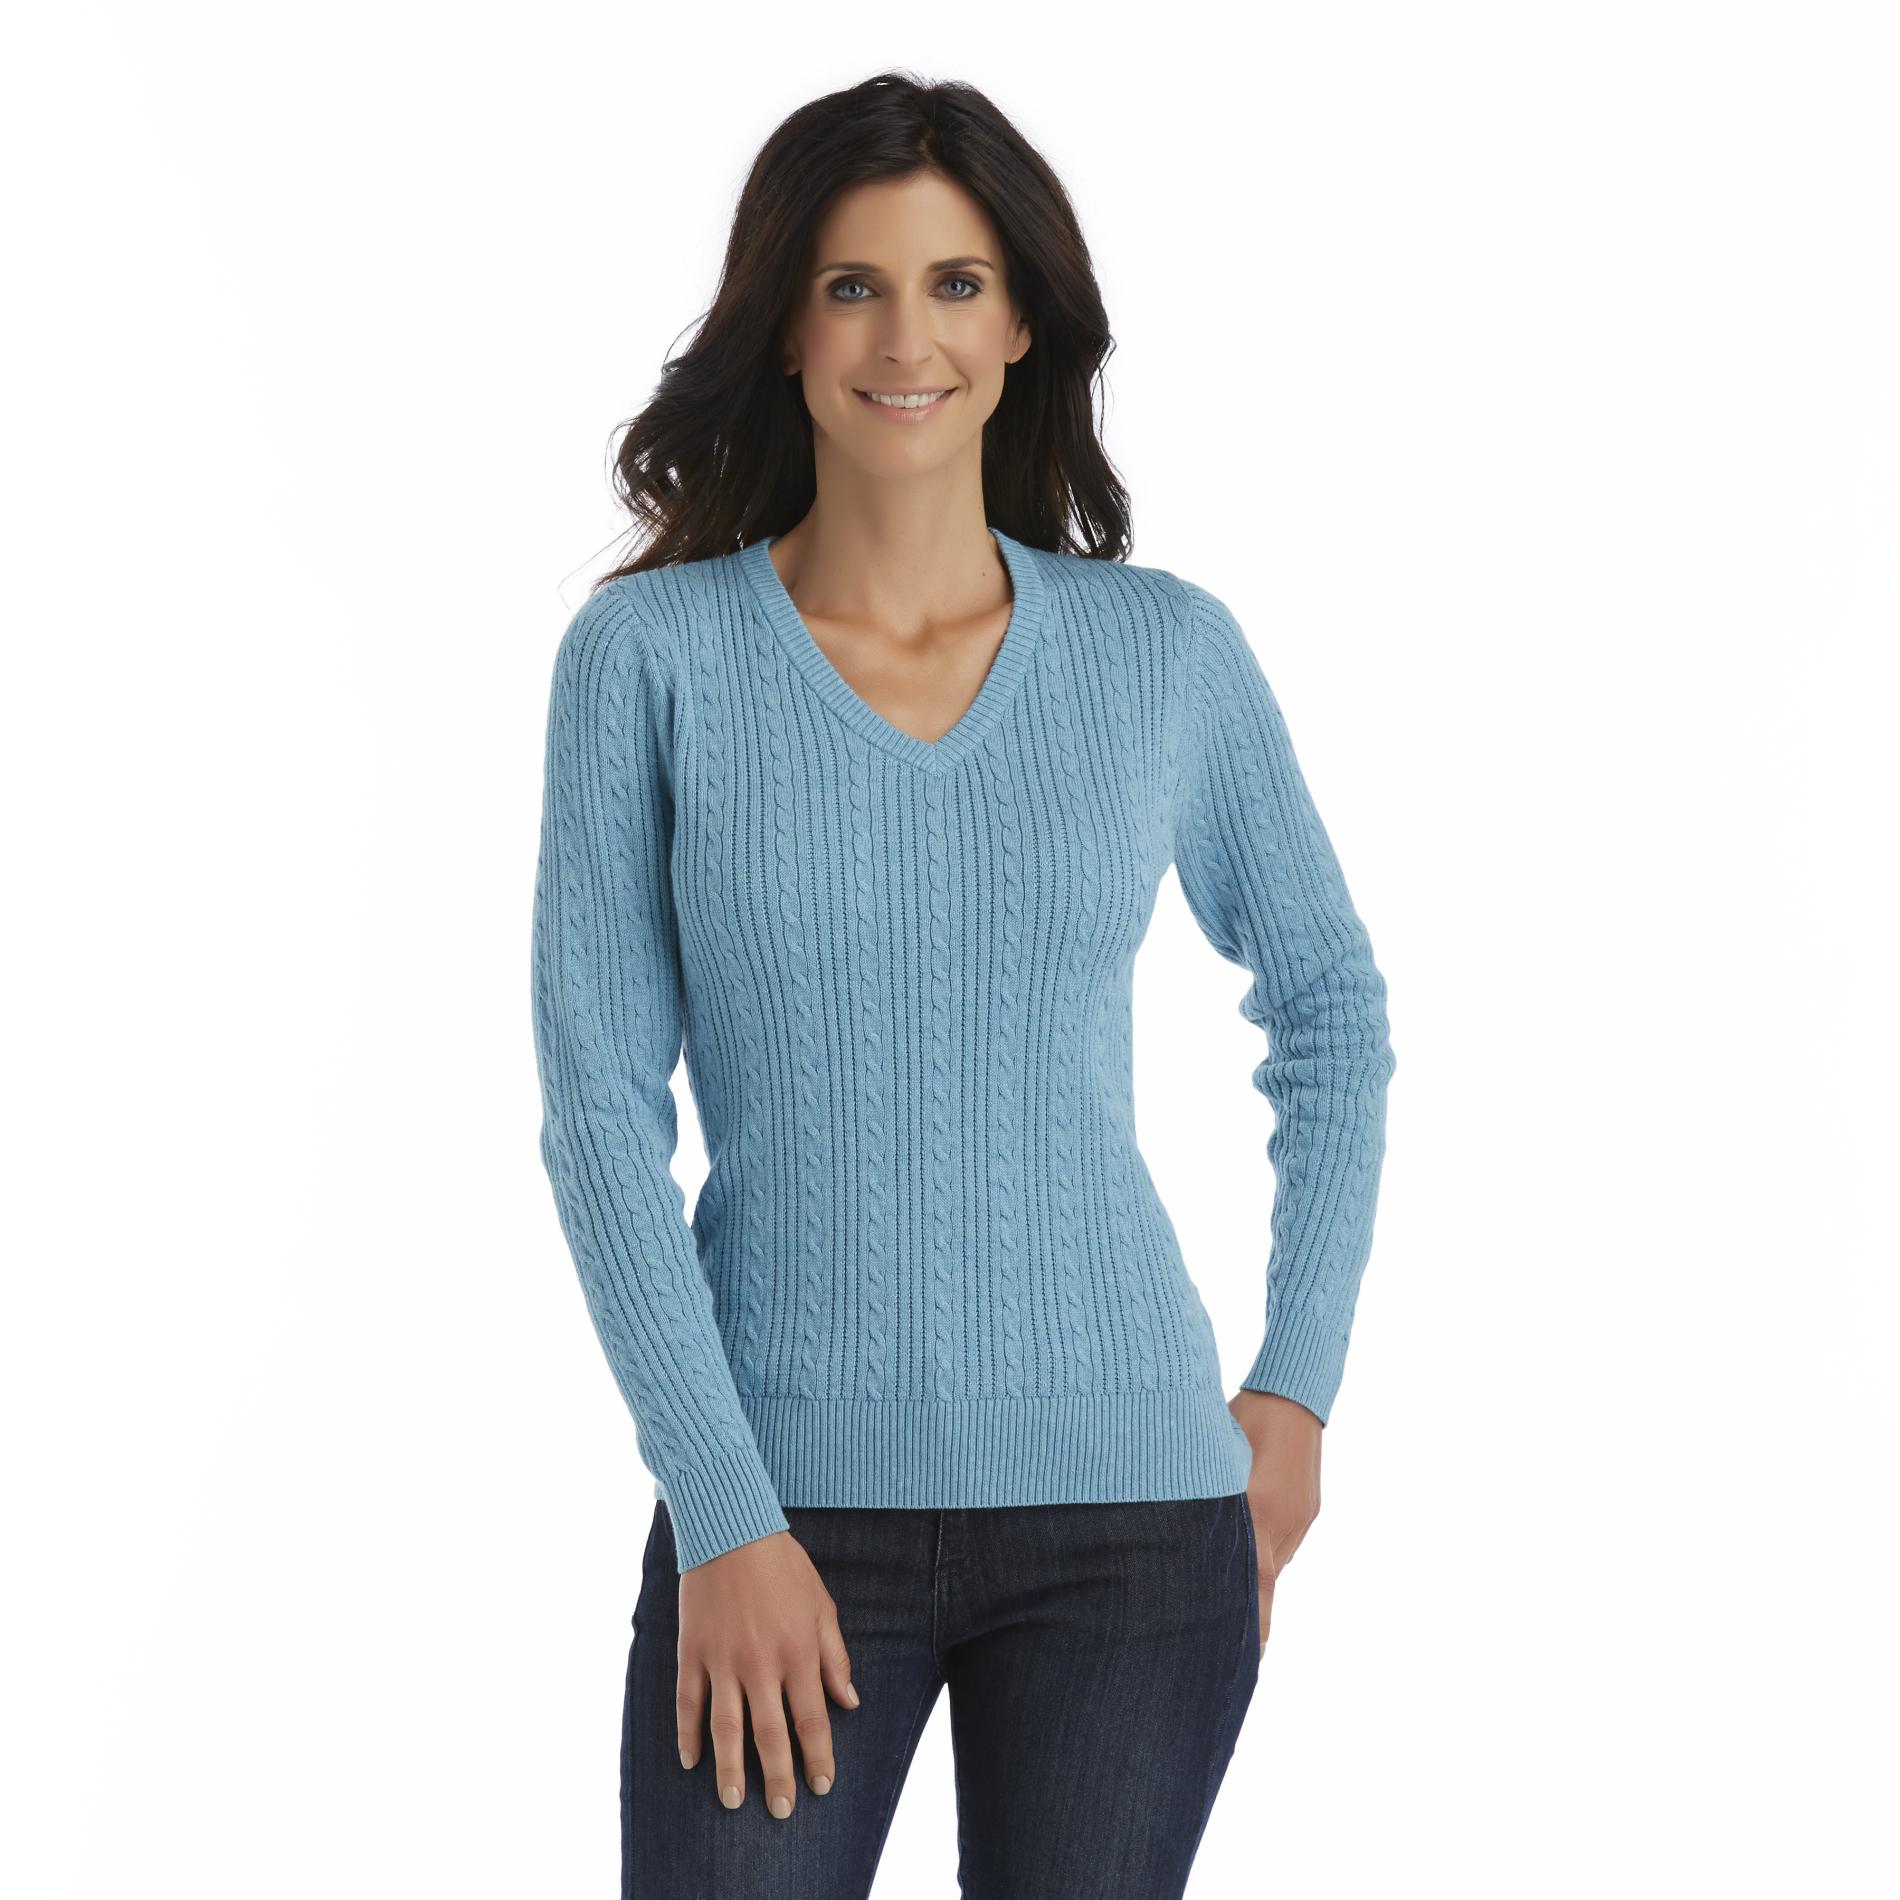 Basic Editions Women's Cable Knit V-Neck Sweater